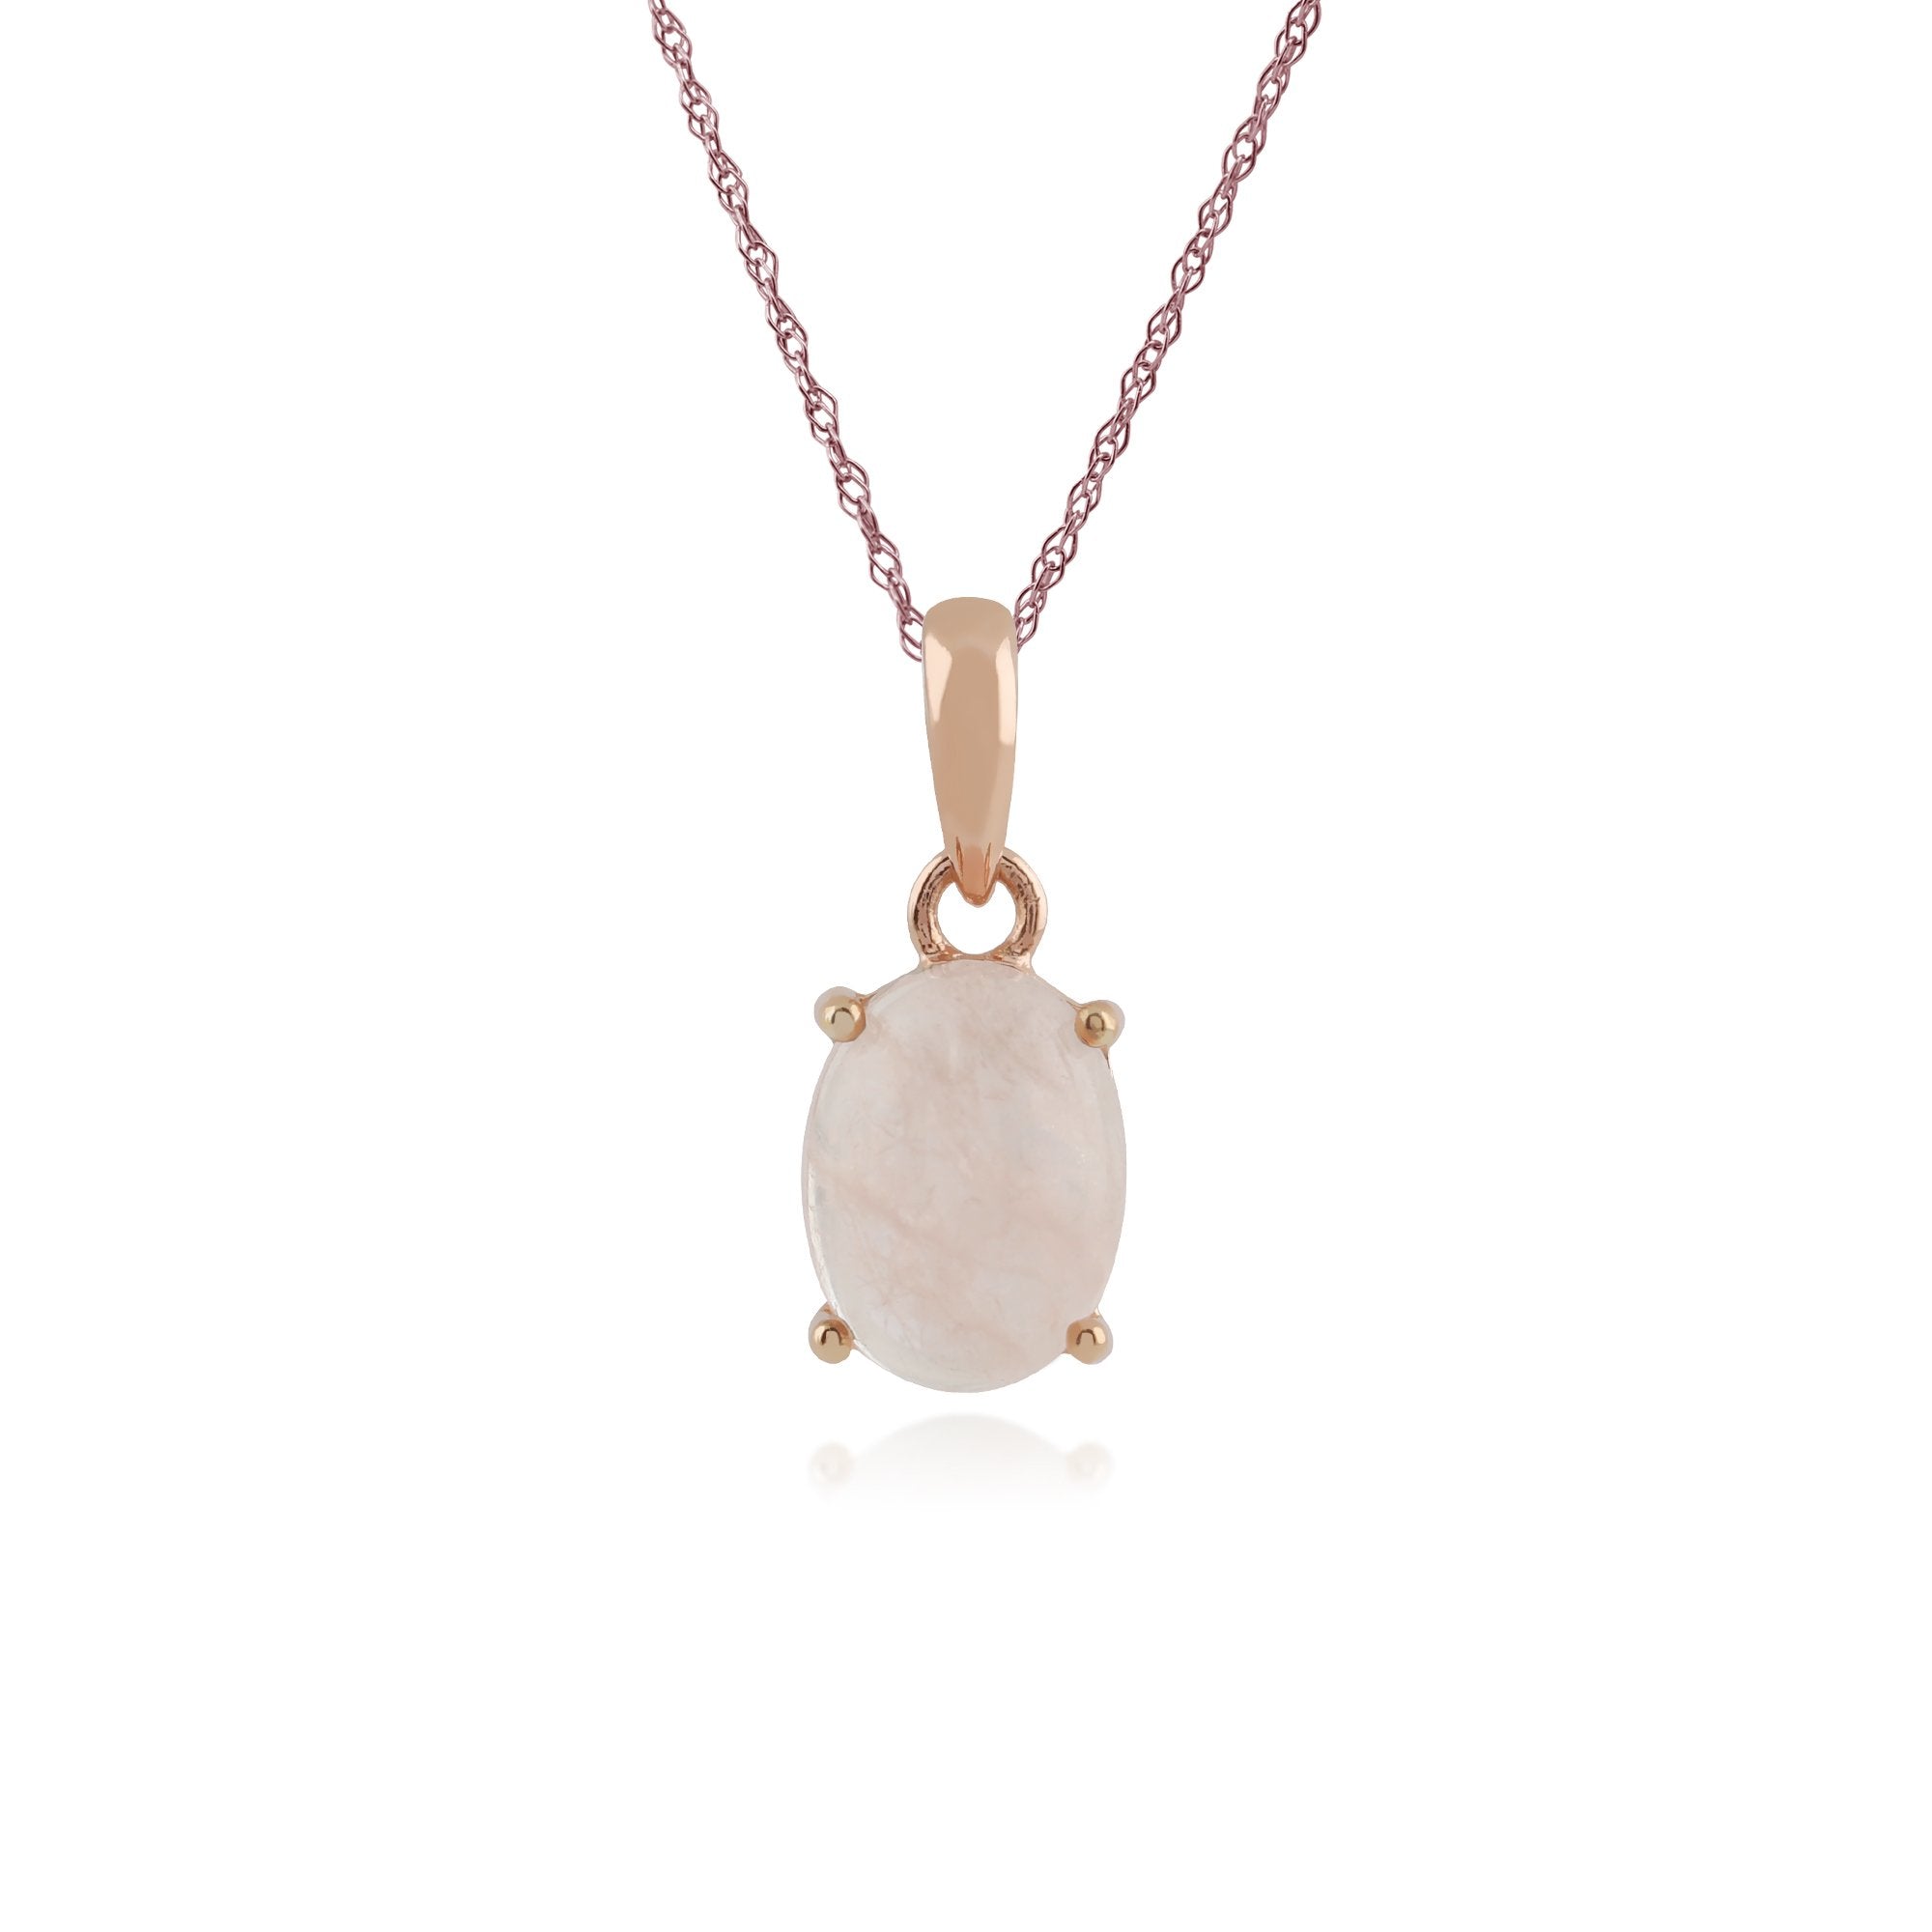 Classic Oval Milky Morganite Single Stone Pendant in Rose Gold Plated 925 Sterling Silver